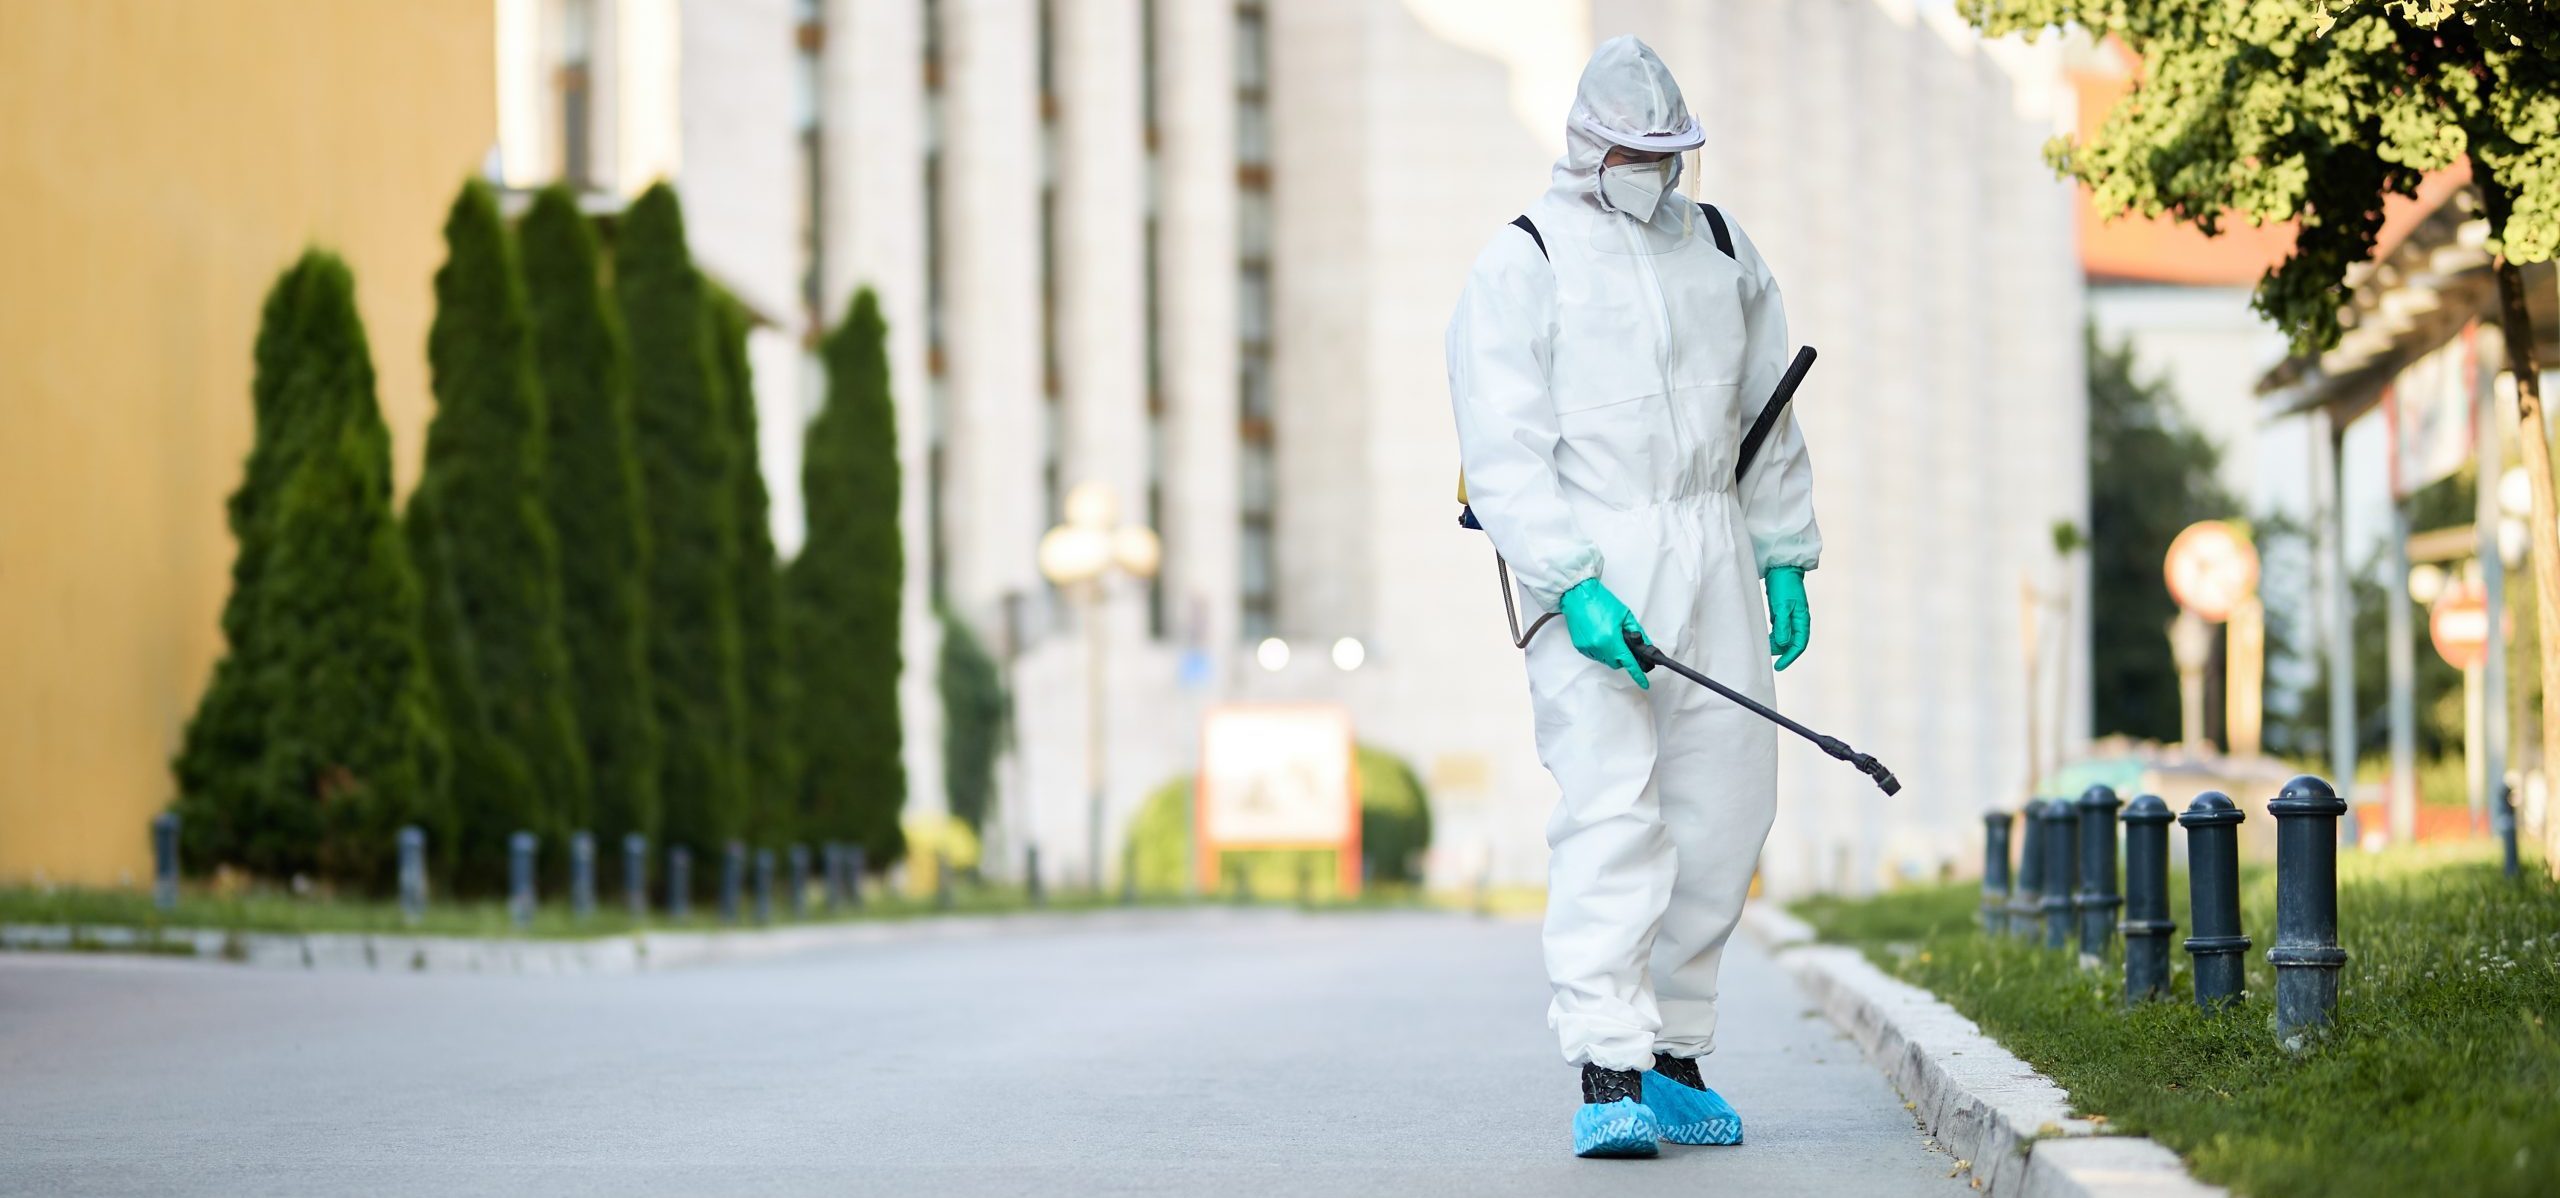 Disinfectant worker in protective suit sanitizing empty city streets during COVID-19 epidemic.